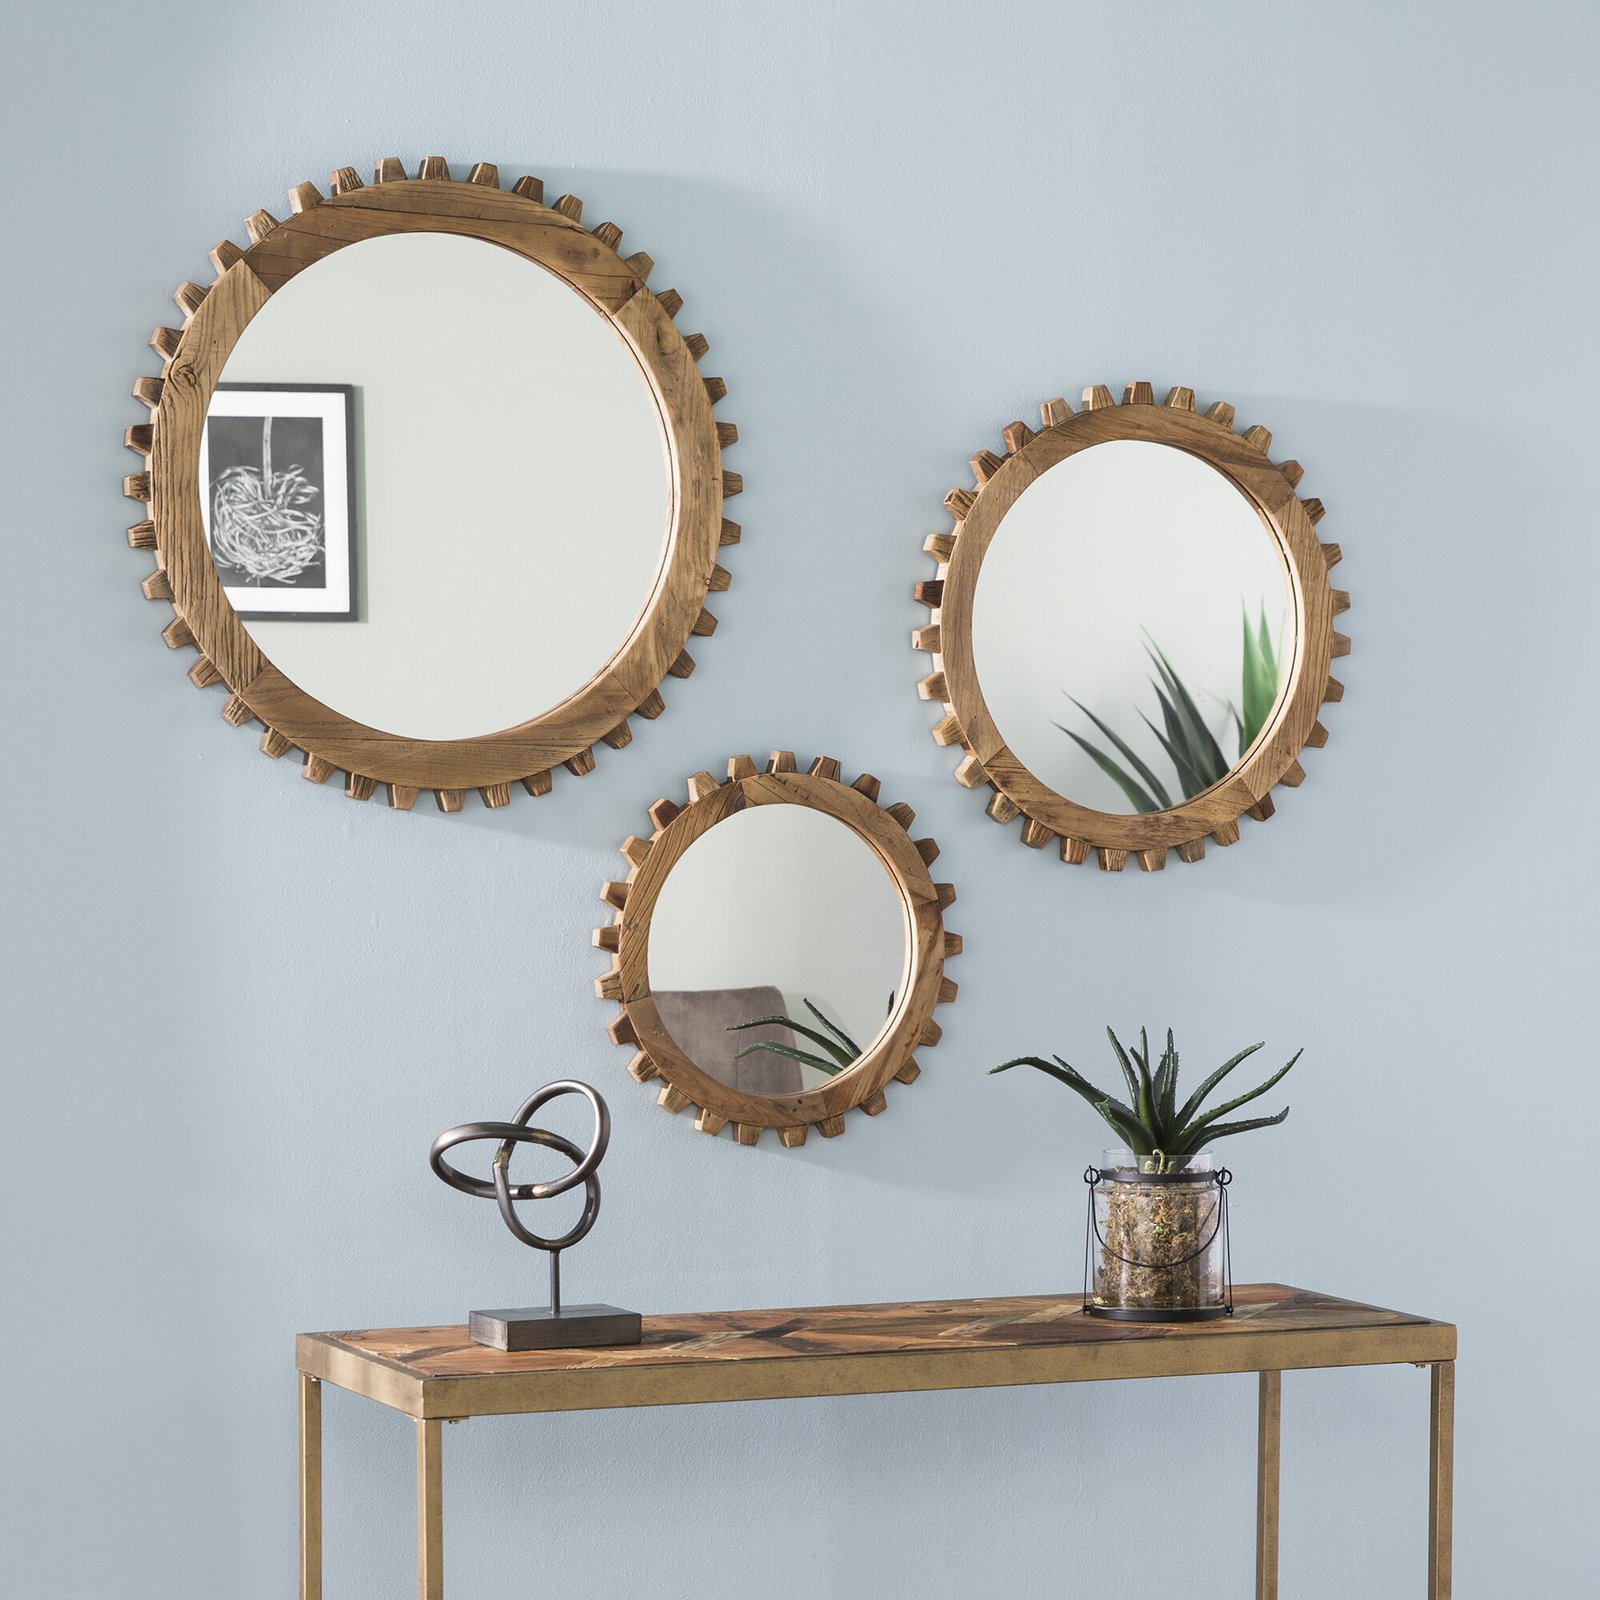 A Trio of Industrial Mirrors